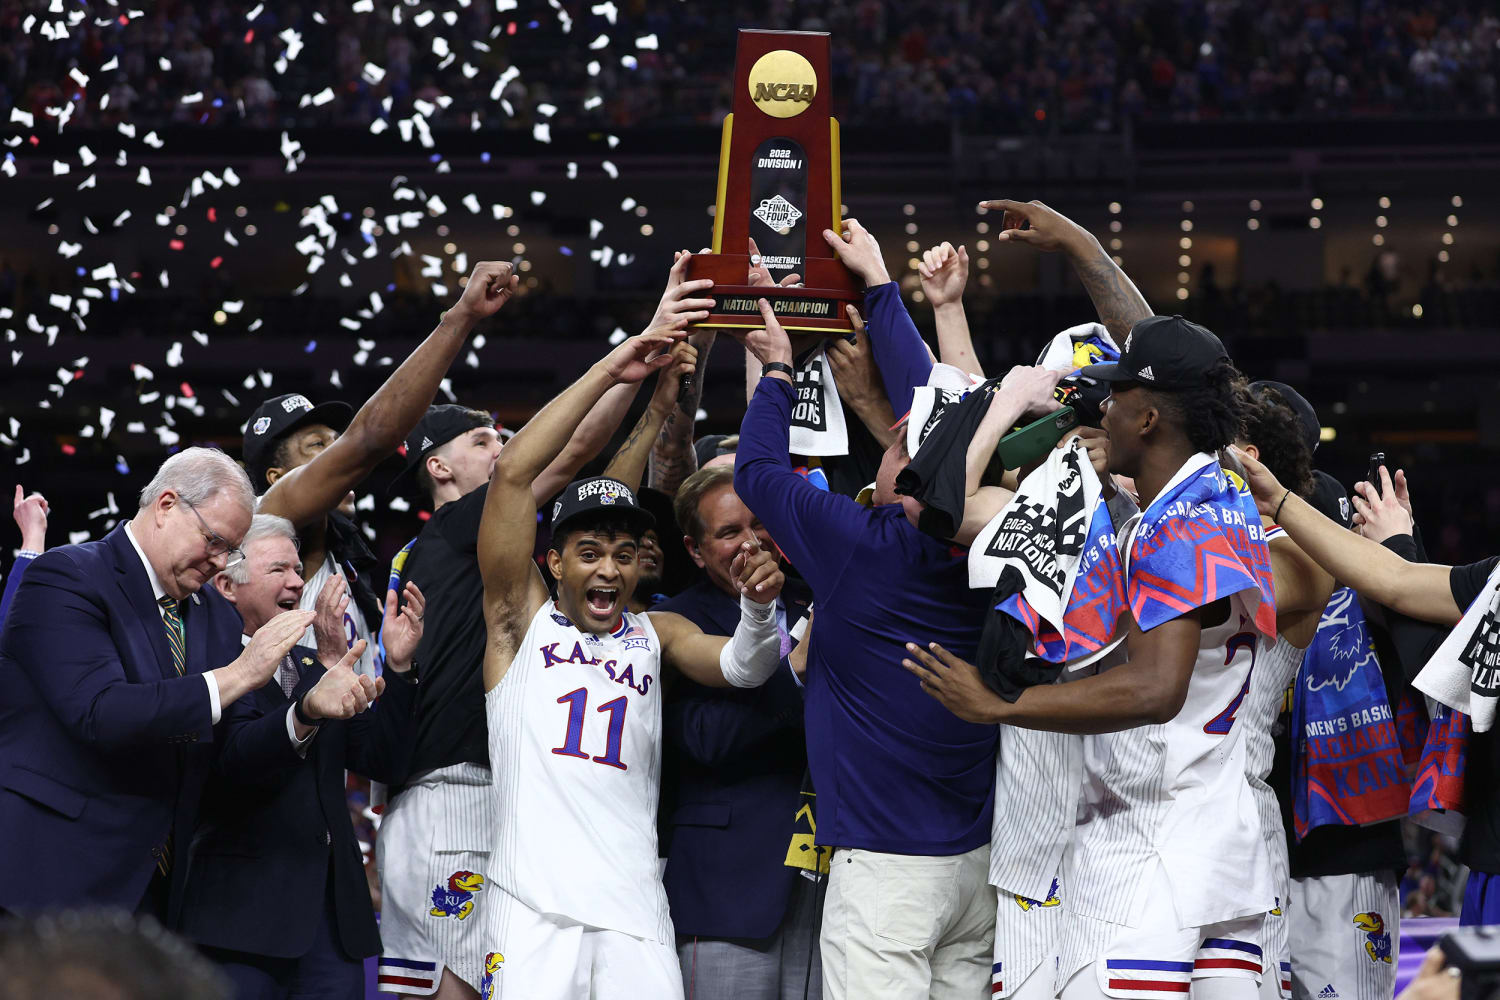 University of Kansas comes back to beat UNC, claiming 4th mens NCAA title